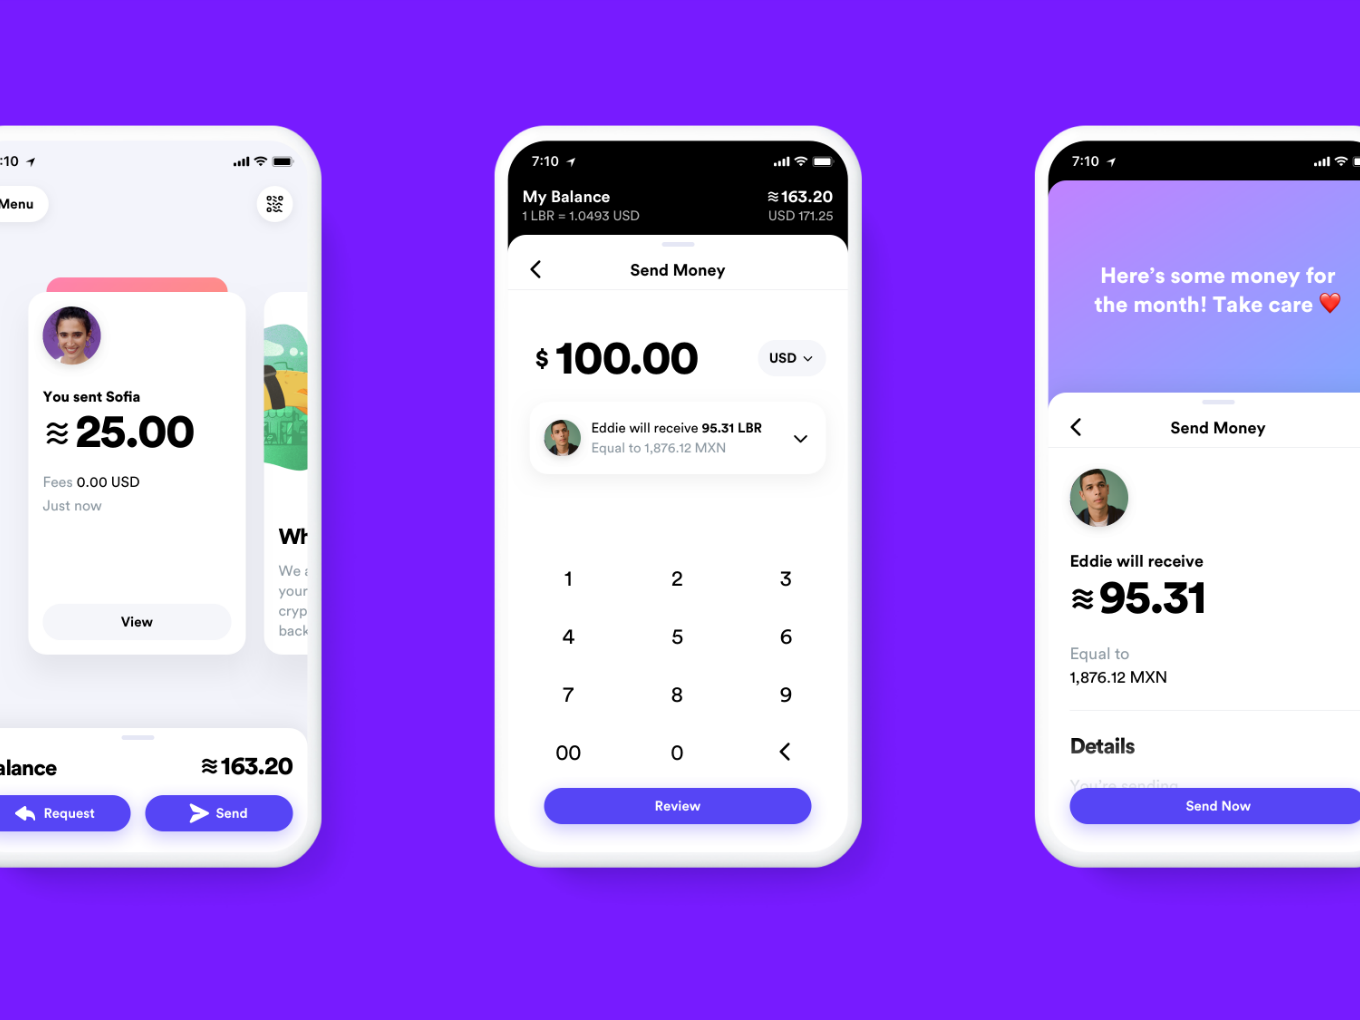 Facebook’s New Cryptocurrency Project Libra Takes Off